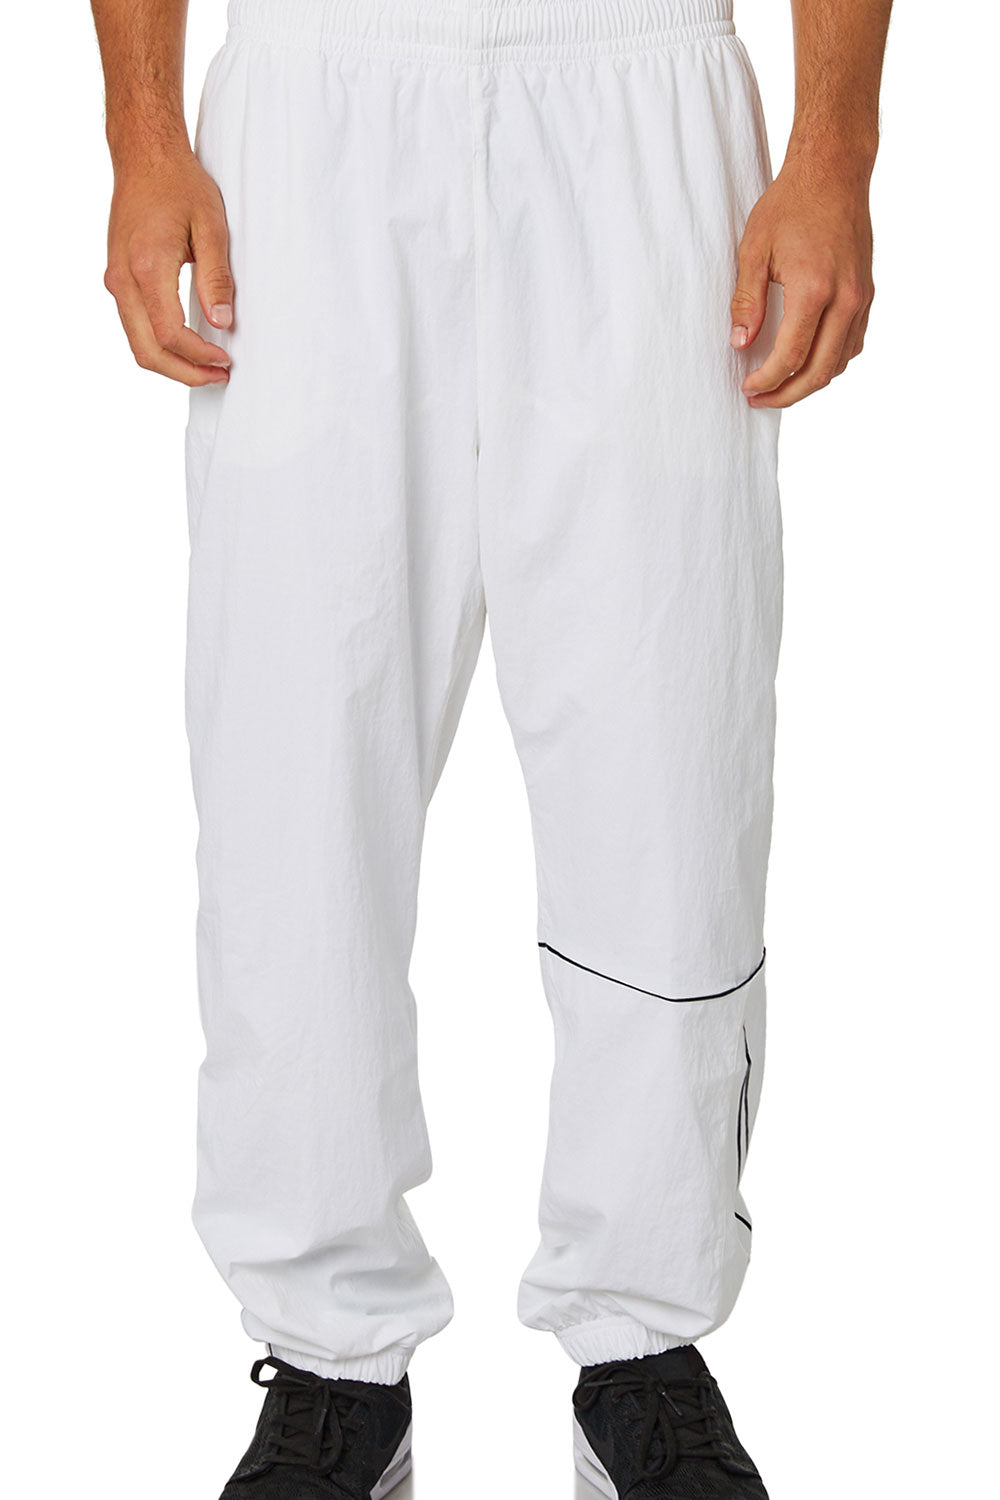 white baggy track pants